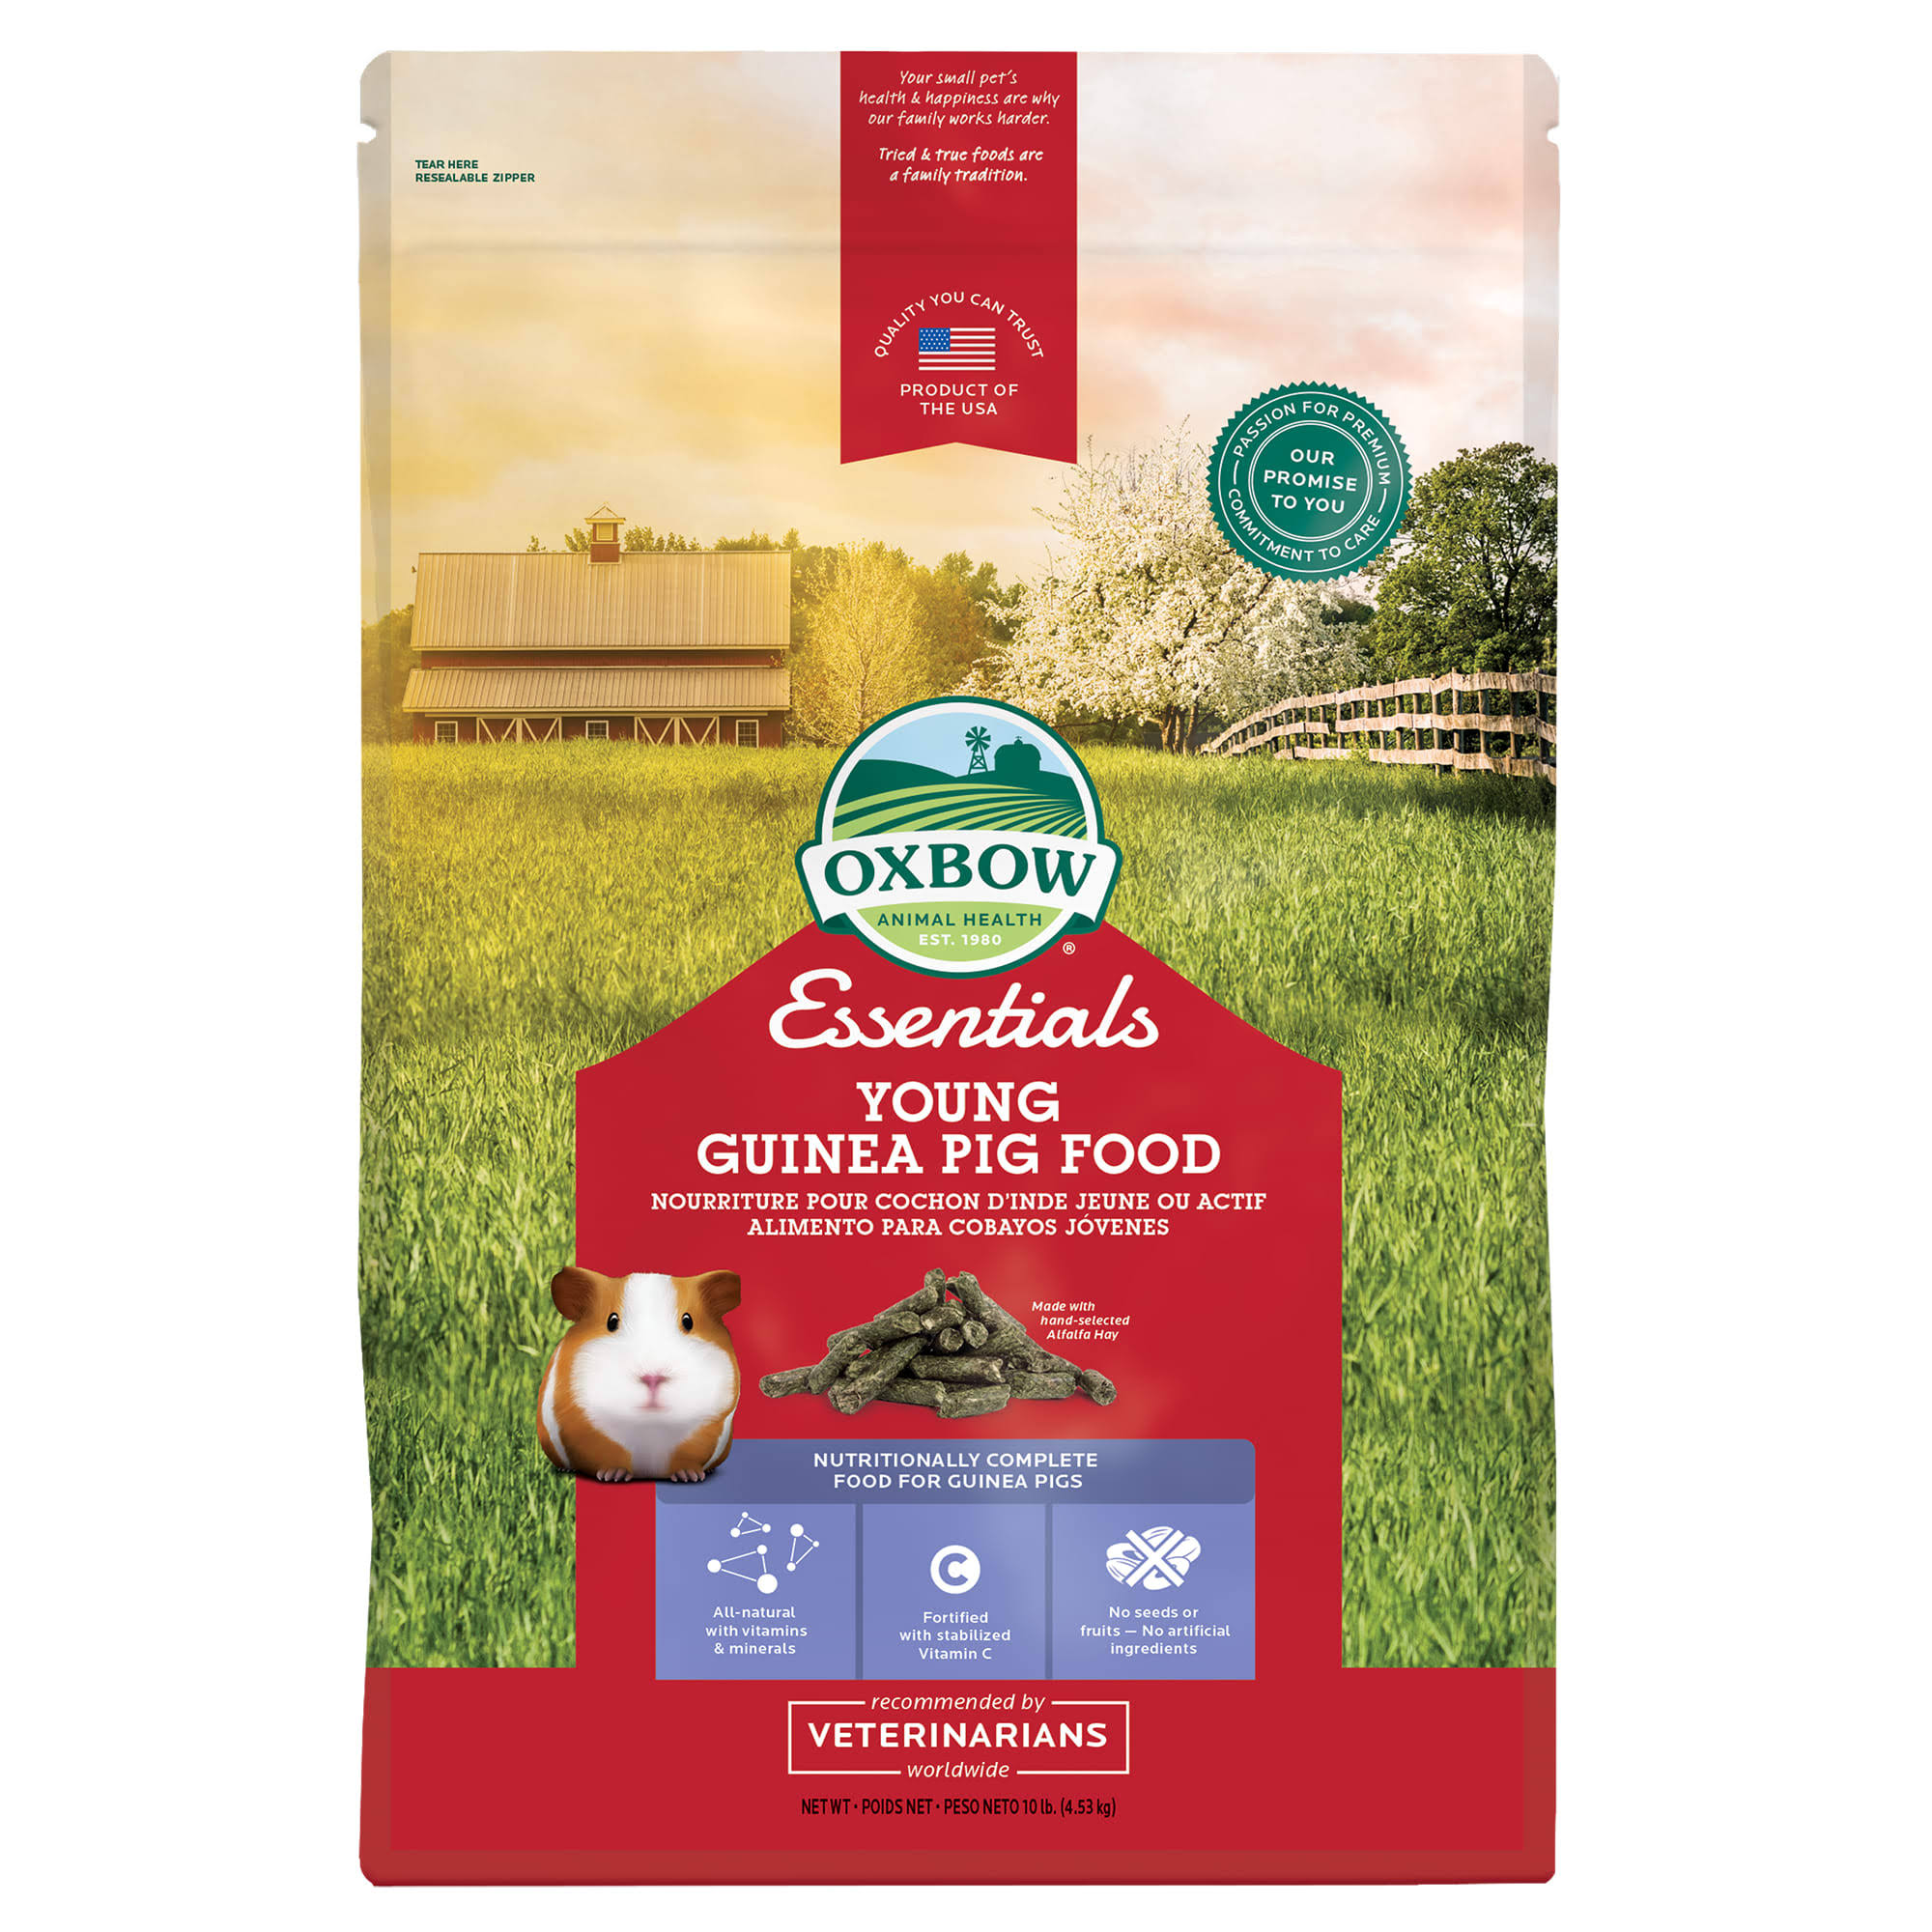 Oxbow Essentials - Young Guinea Pig Food 10 lbs